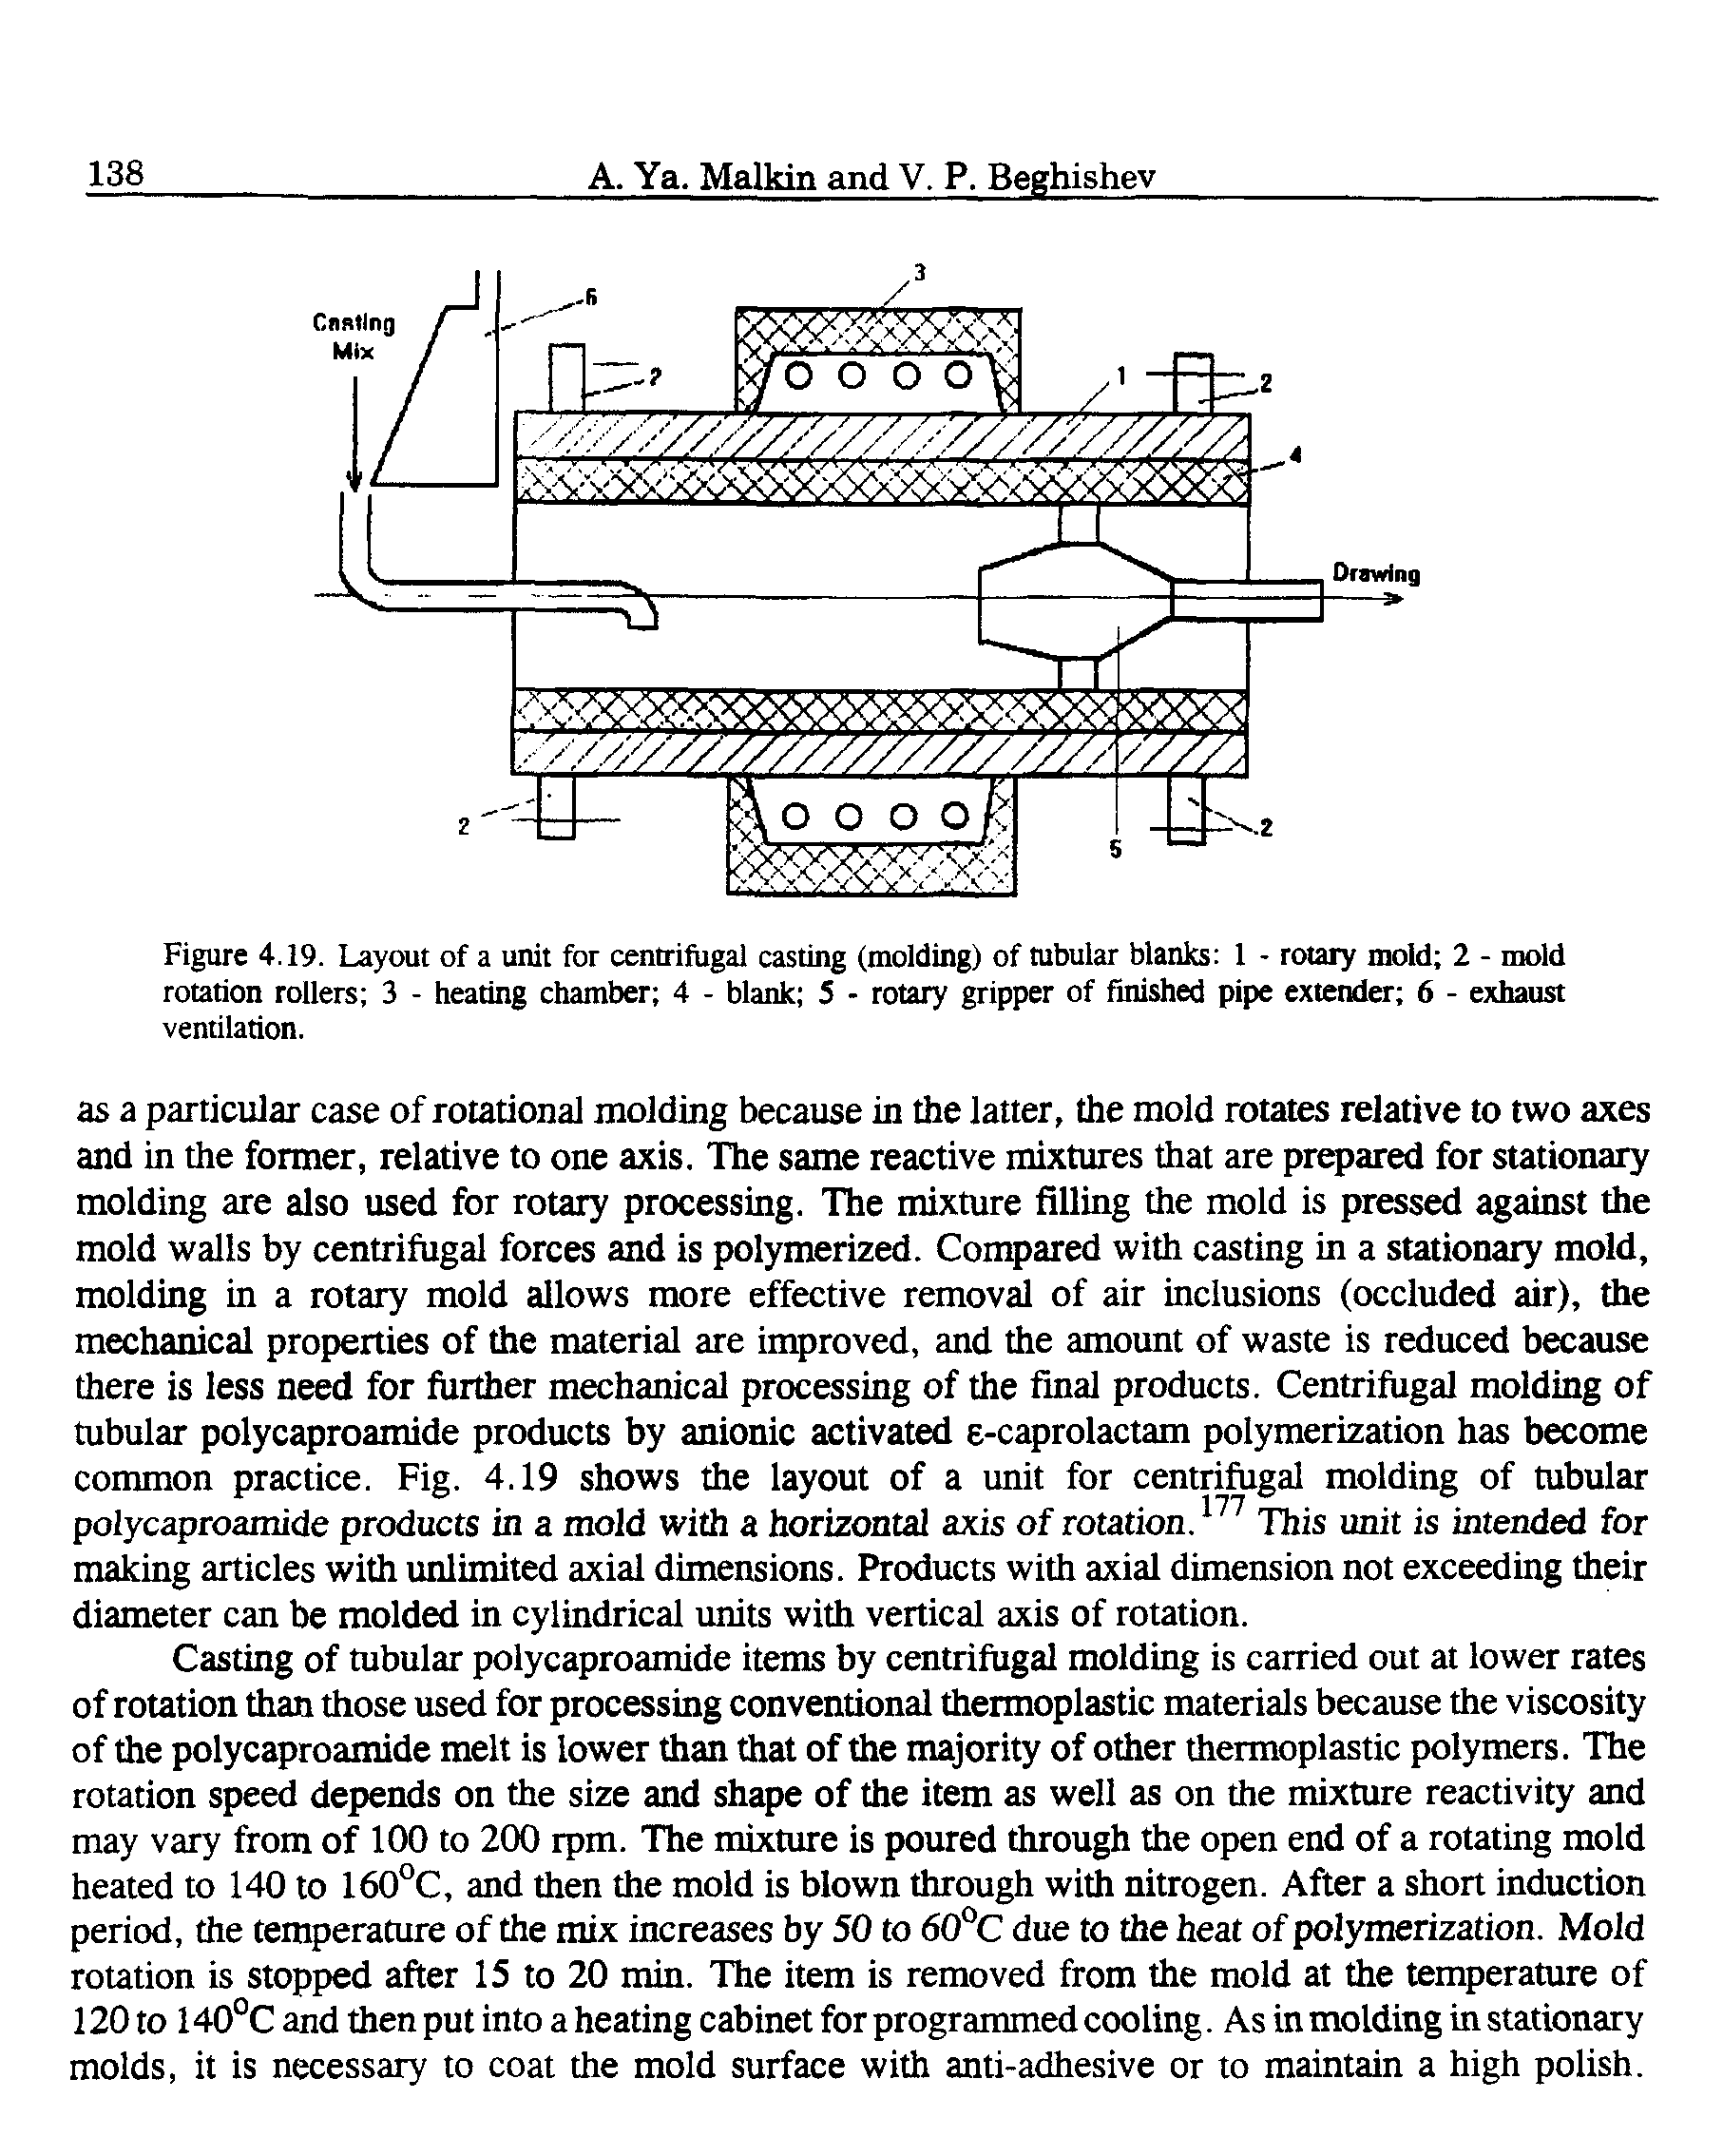 Figure 4.19. Layout of a unit for centrifugal casting (molding) of tubular blanks 1 - rotary mold 2 - mold rotation rollers 3 - heating chamber 4 - blank 5 - rotary gripper of finished pipe extender 6 - exhaust ventilation.